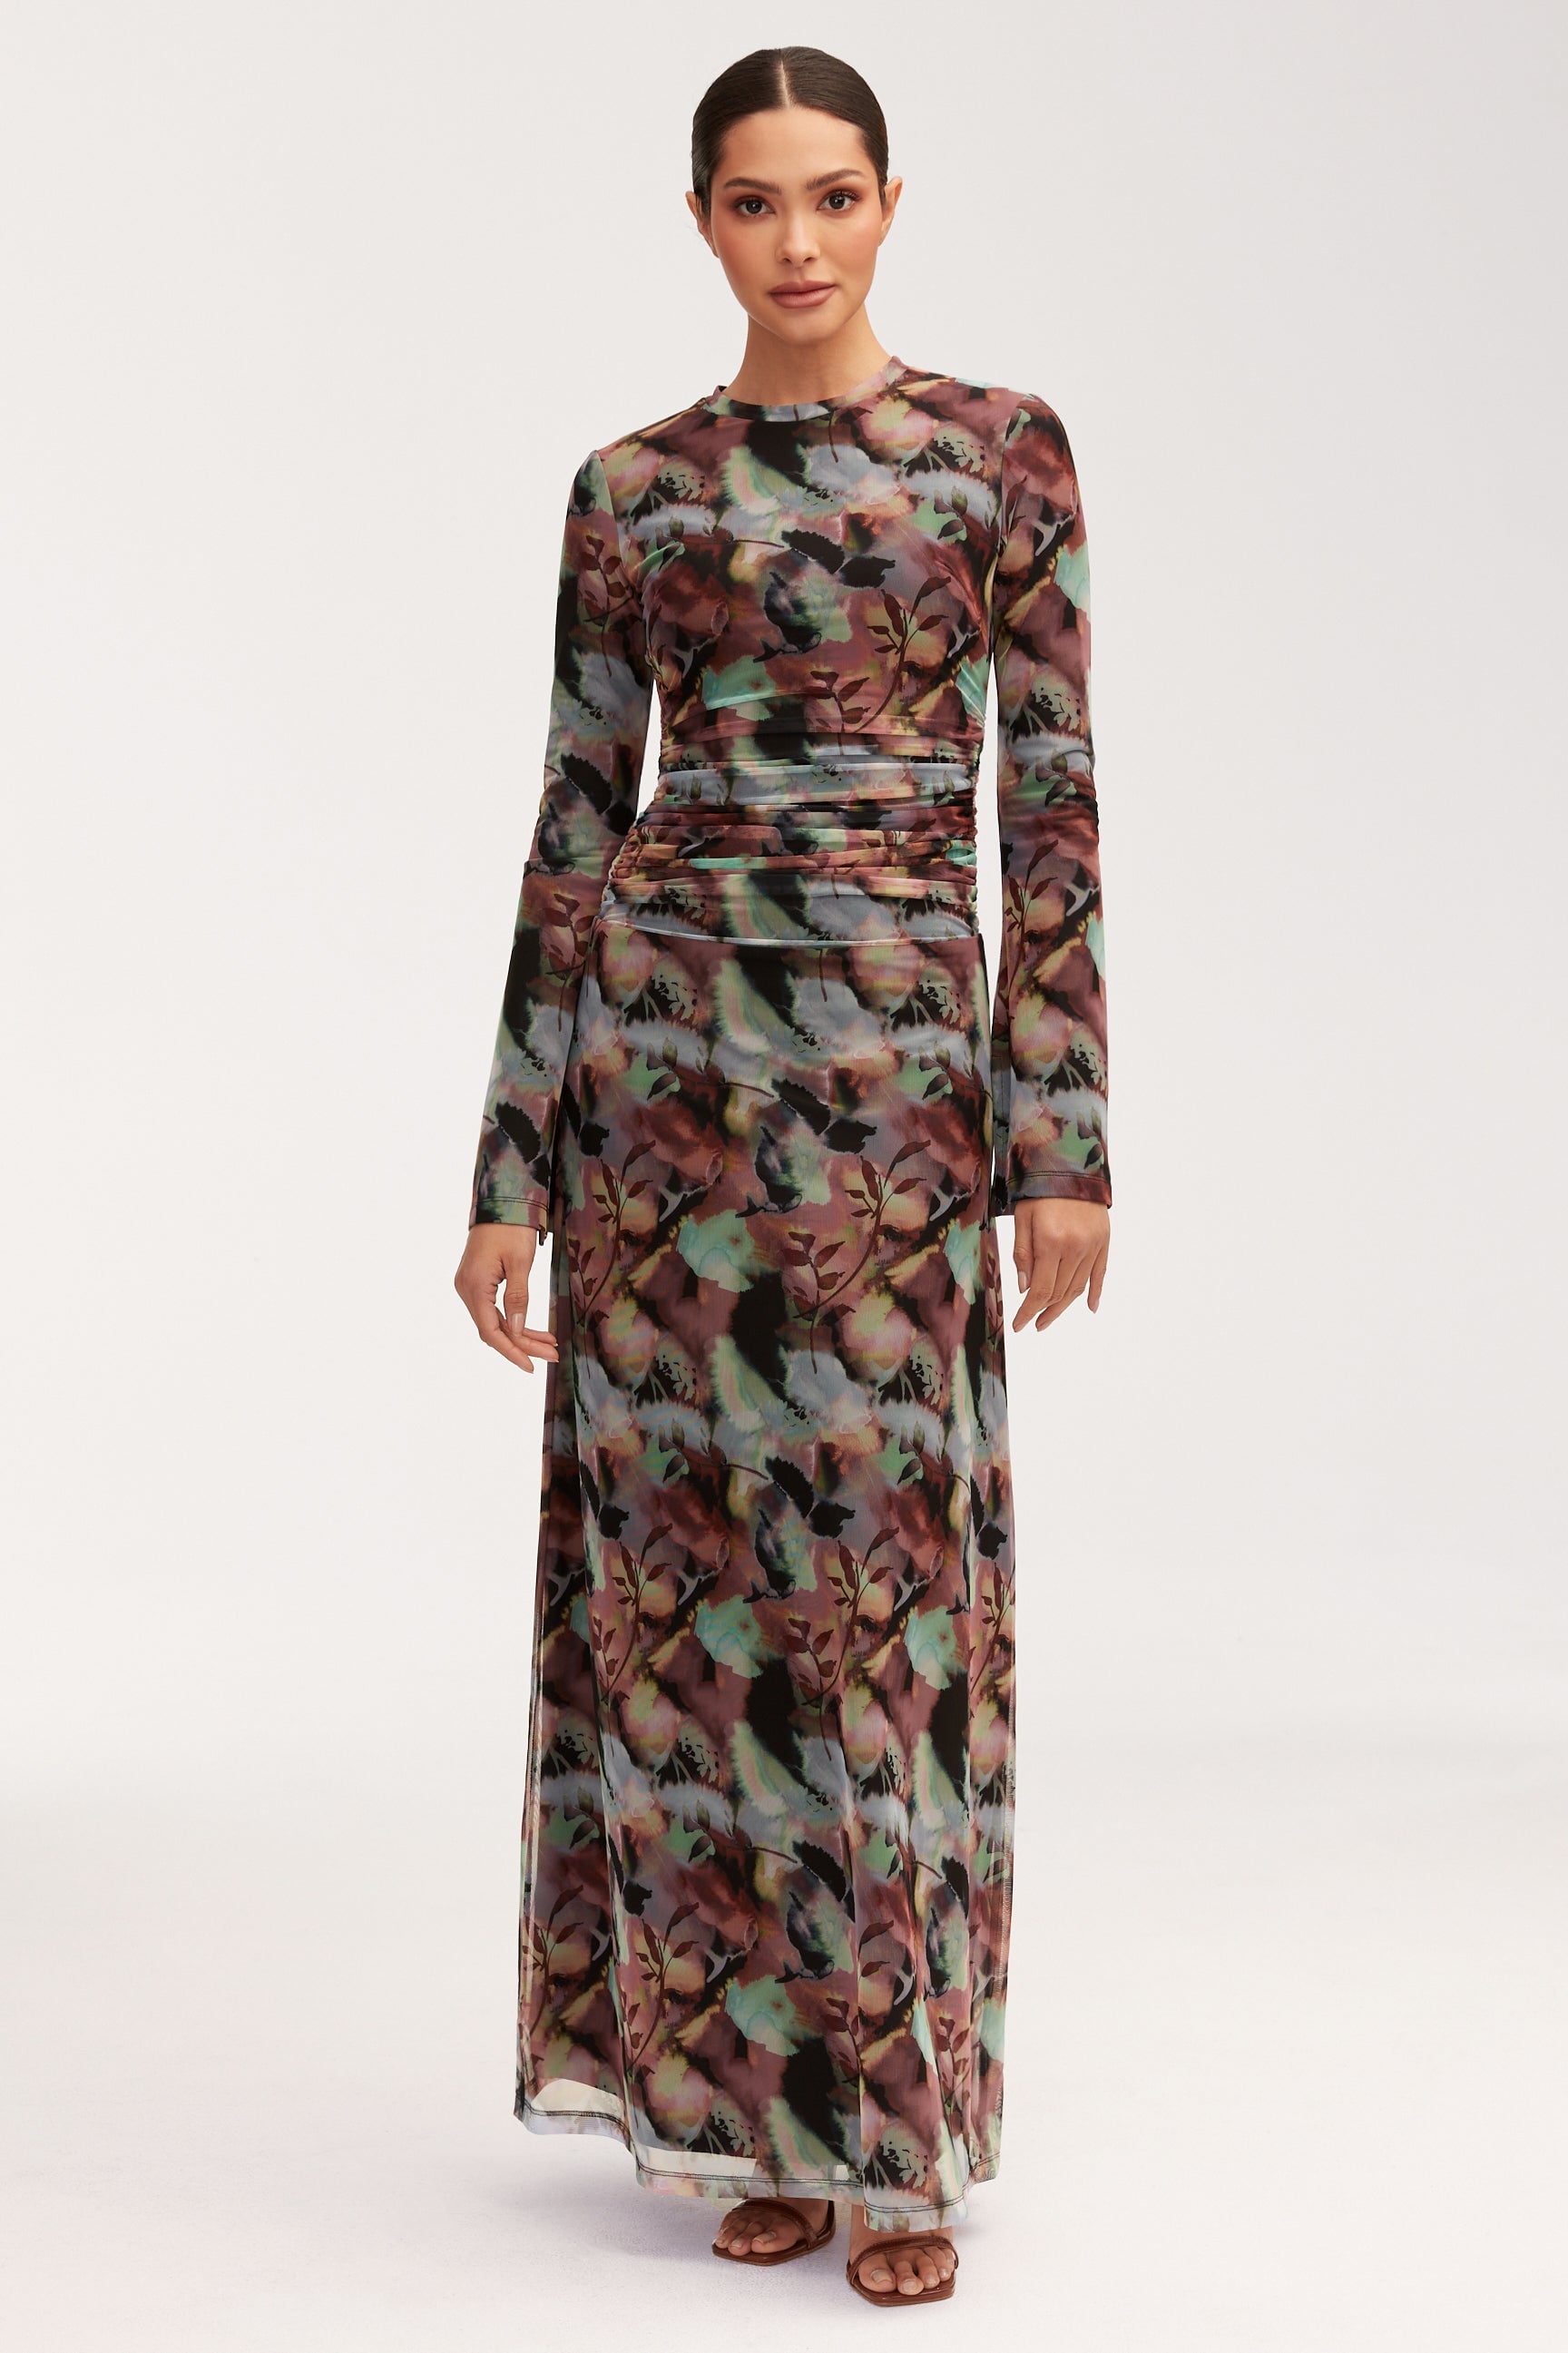 Adelina Rouched Mesh Maxi Dress - Floral Tie Dye Dresses Veiled 